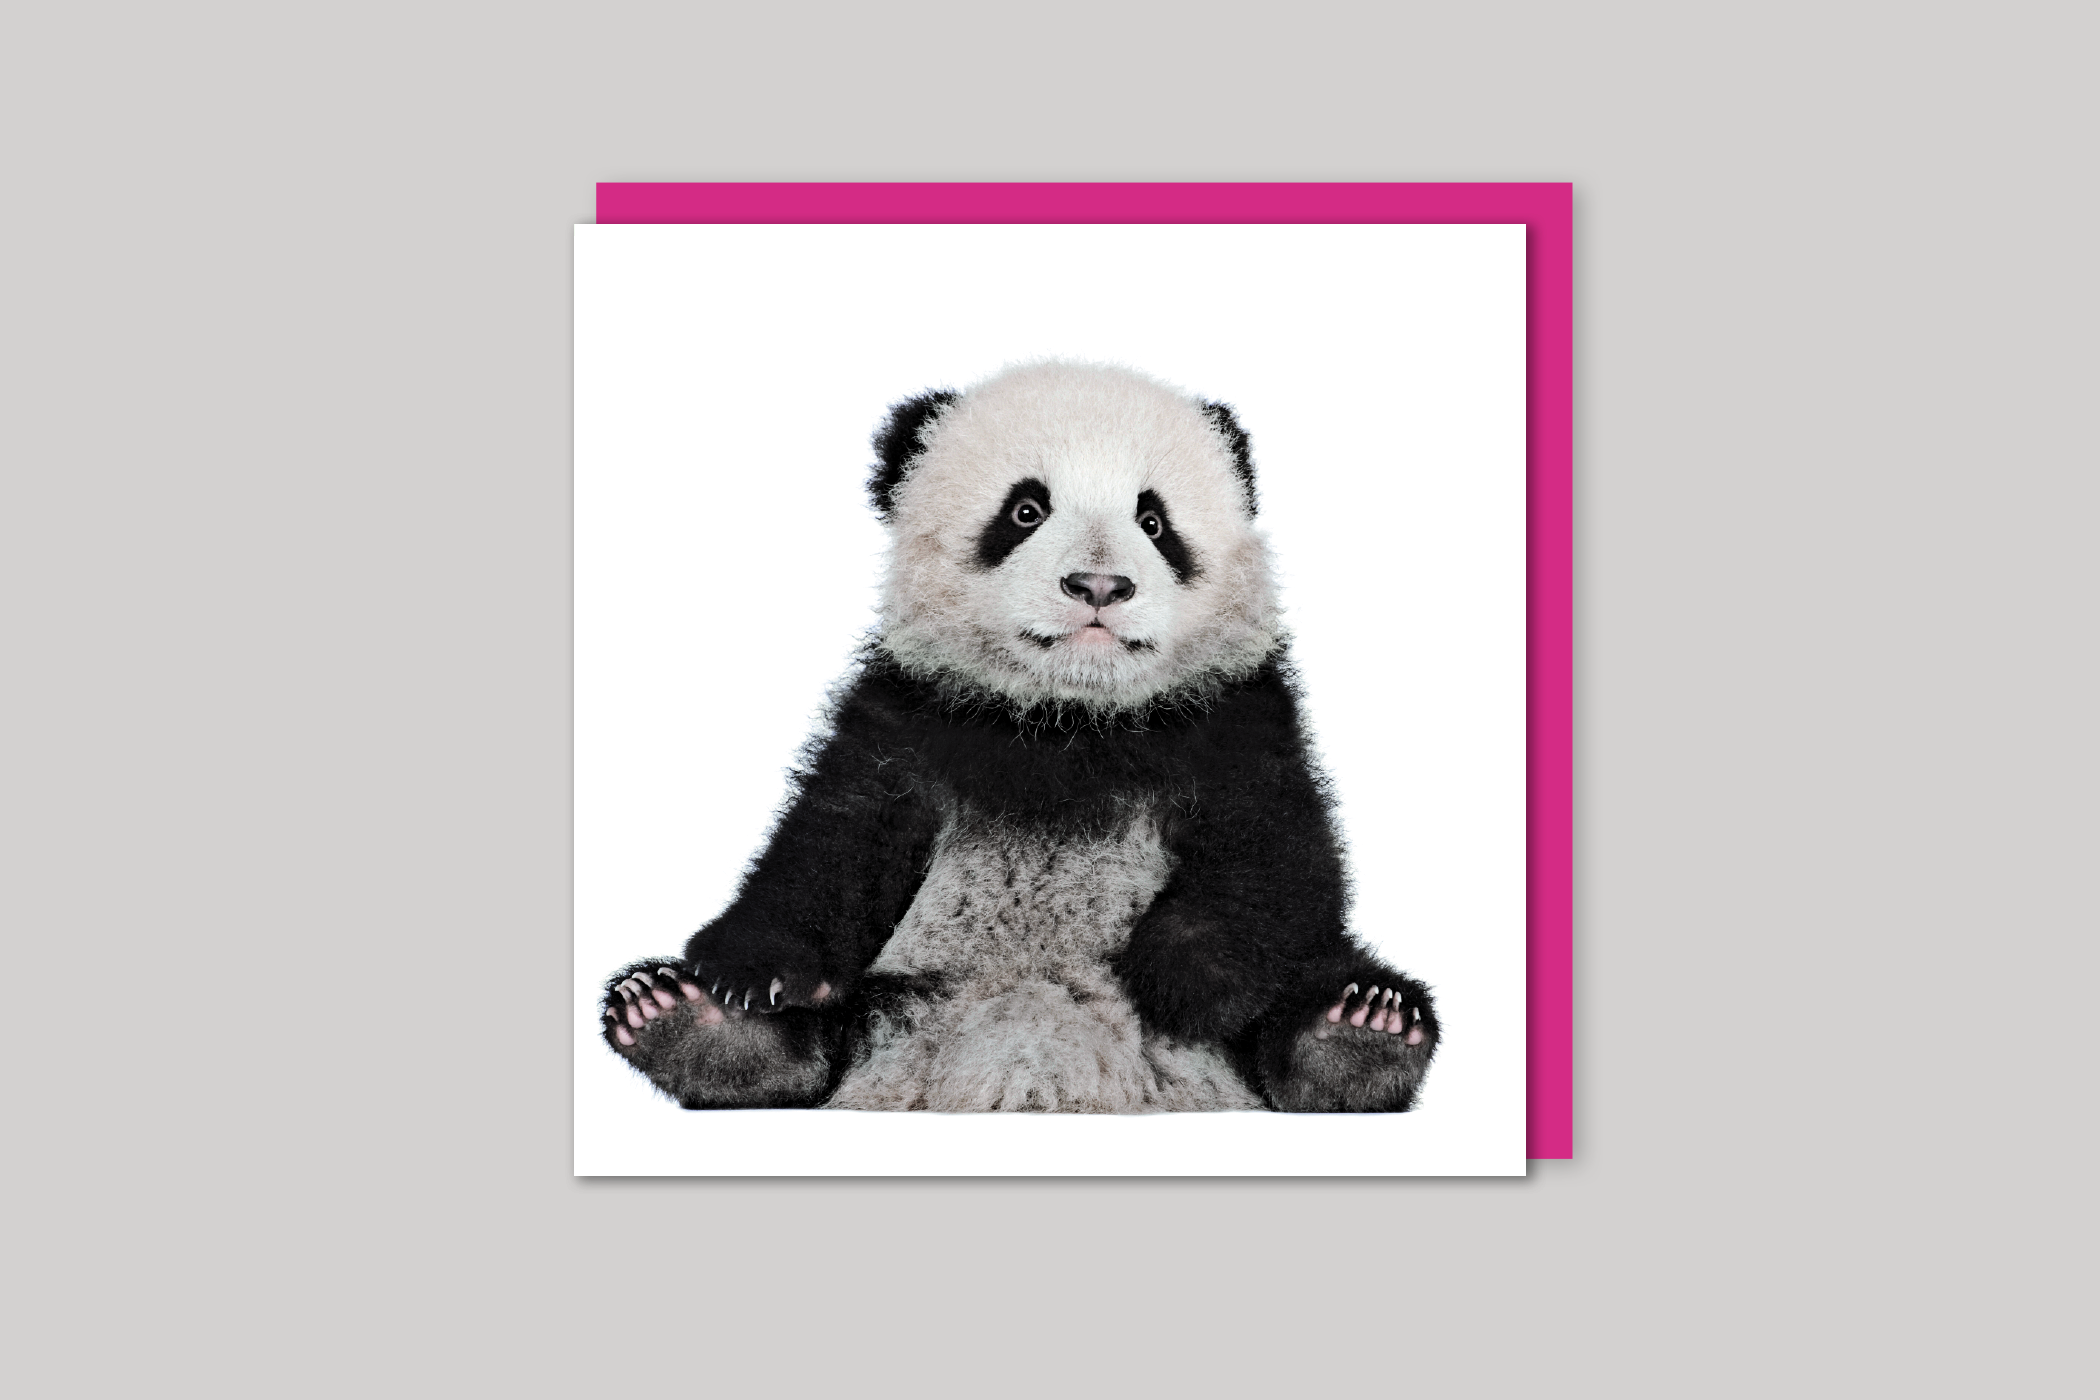 Albert the Panda Cub from Exposure range of photographic cards by Icon, back page.